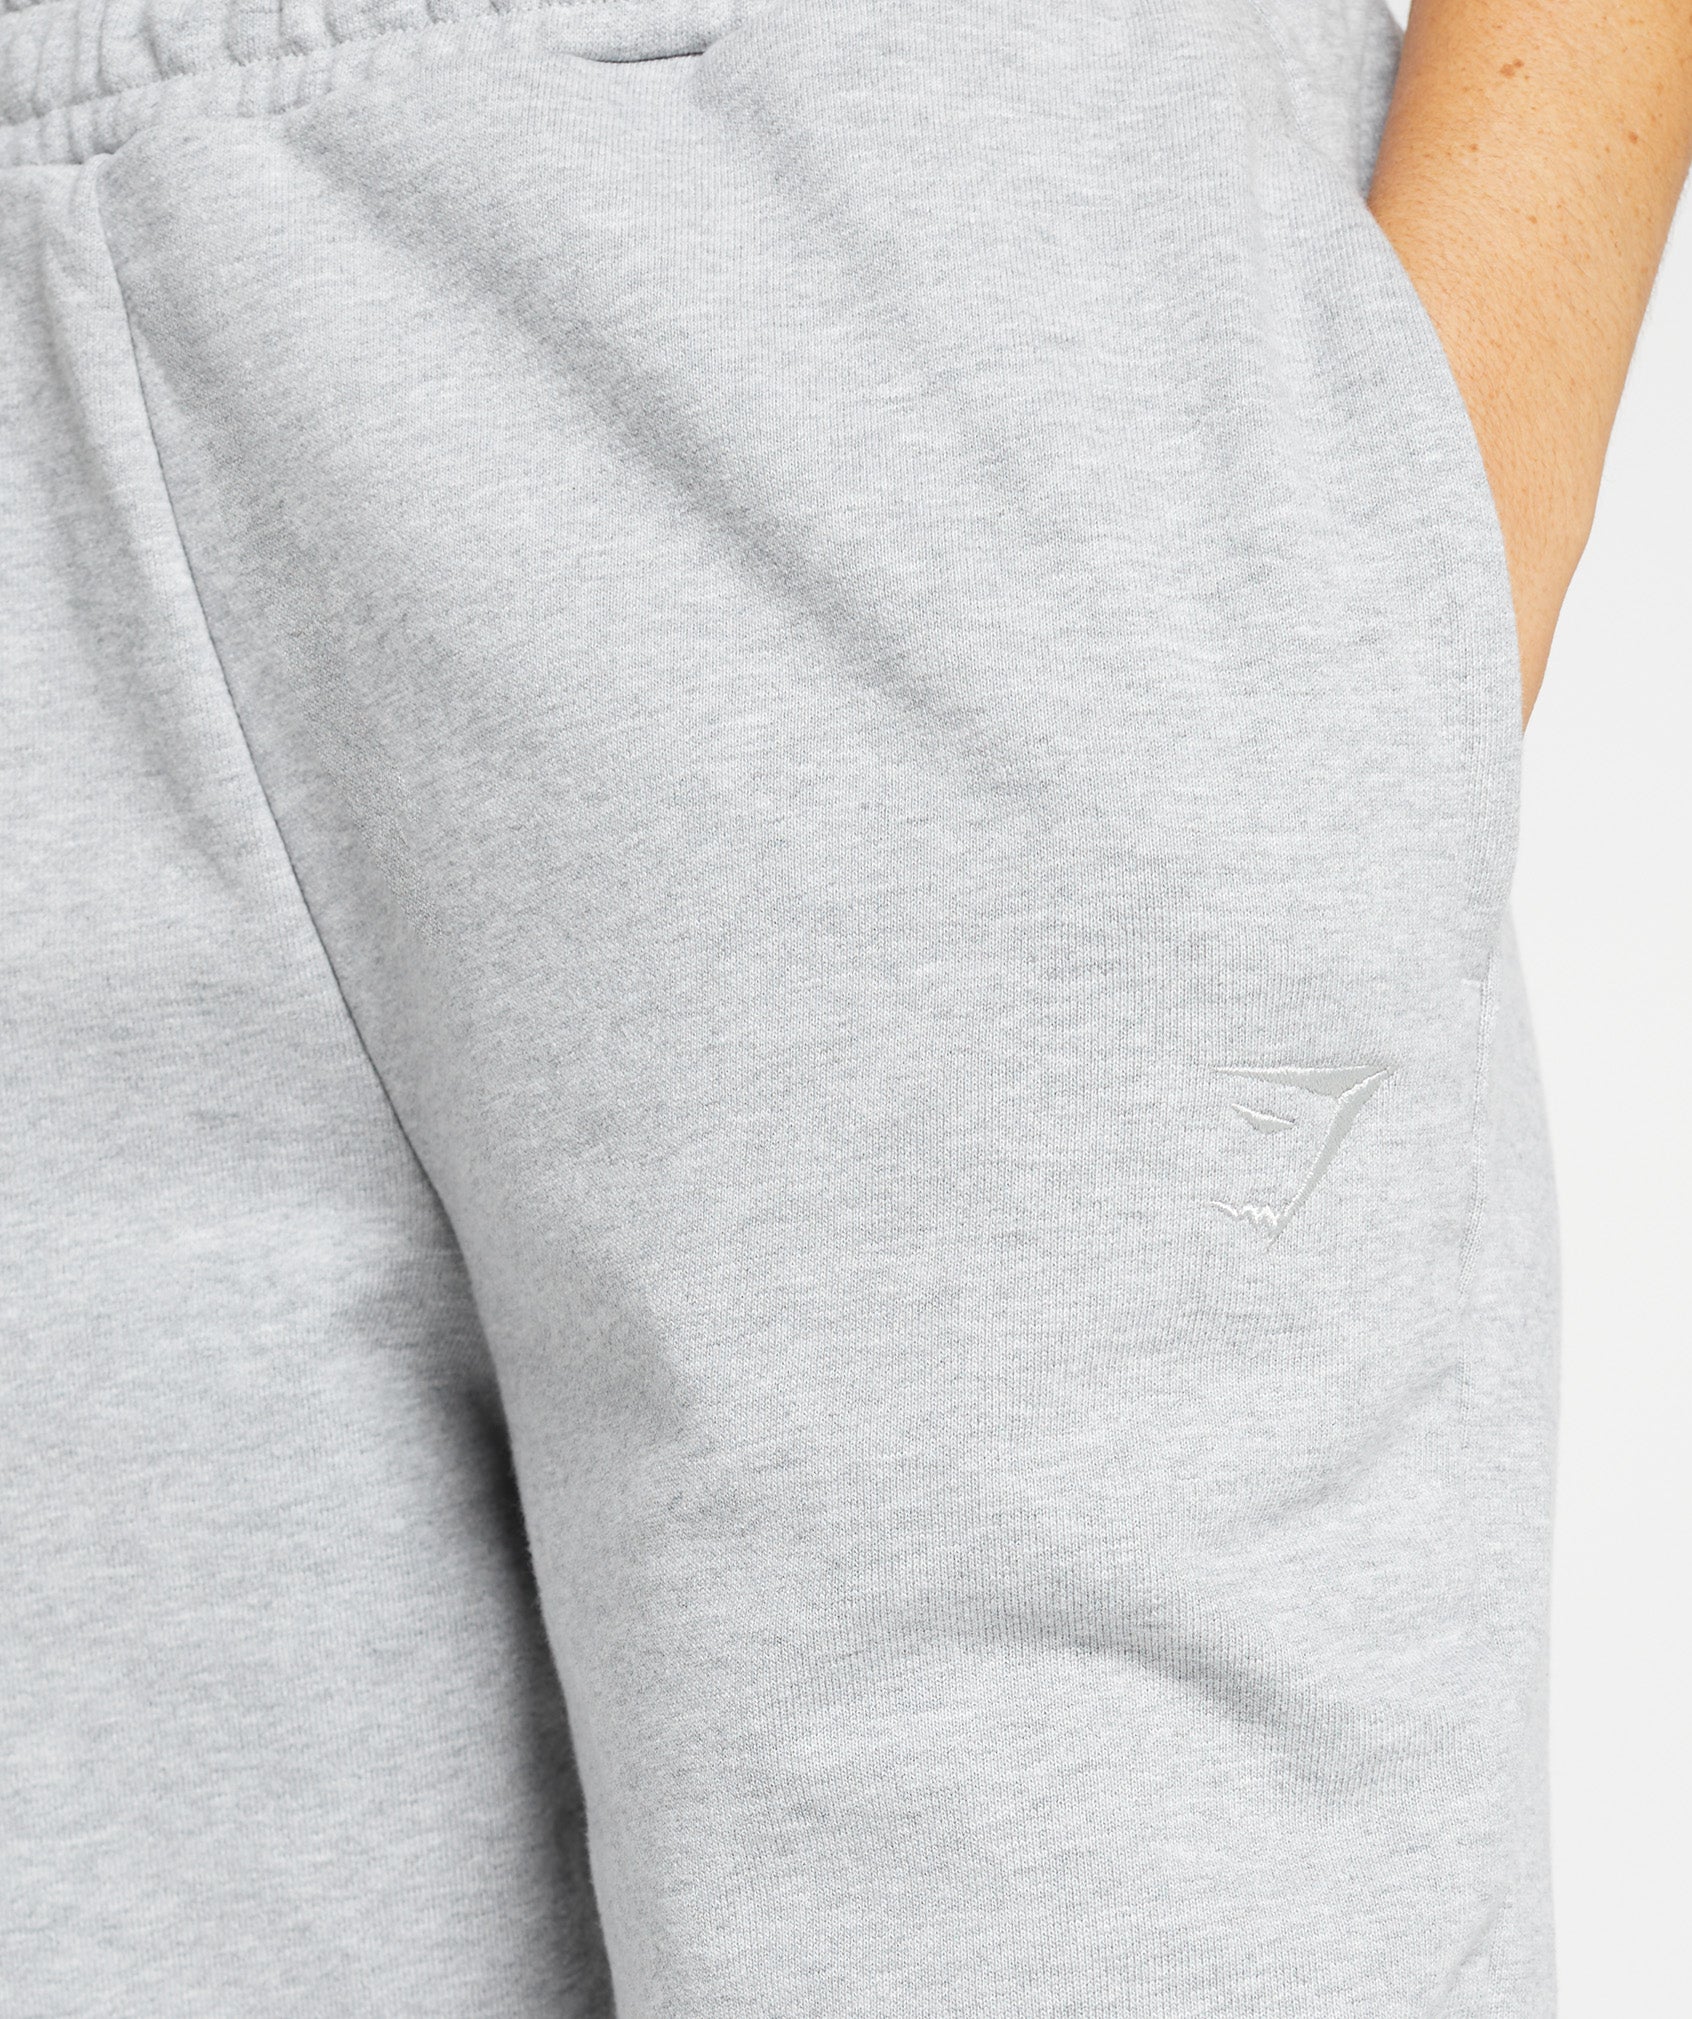 Rest Day Sweats Joggers in Light Grey Core Marl